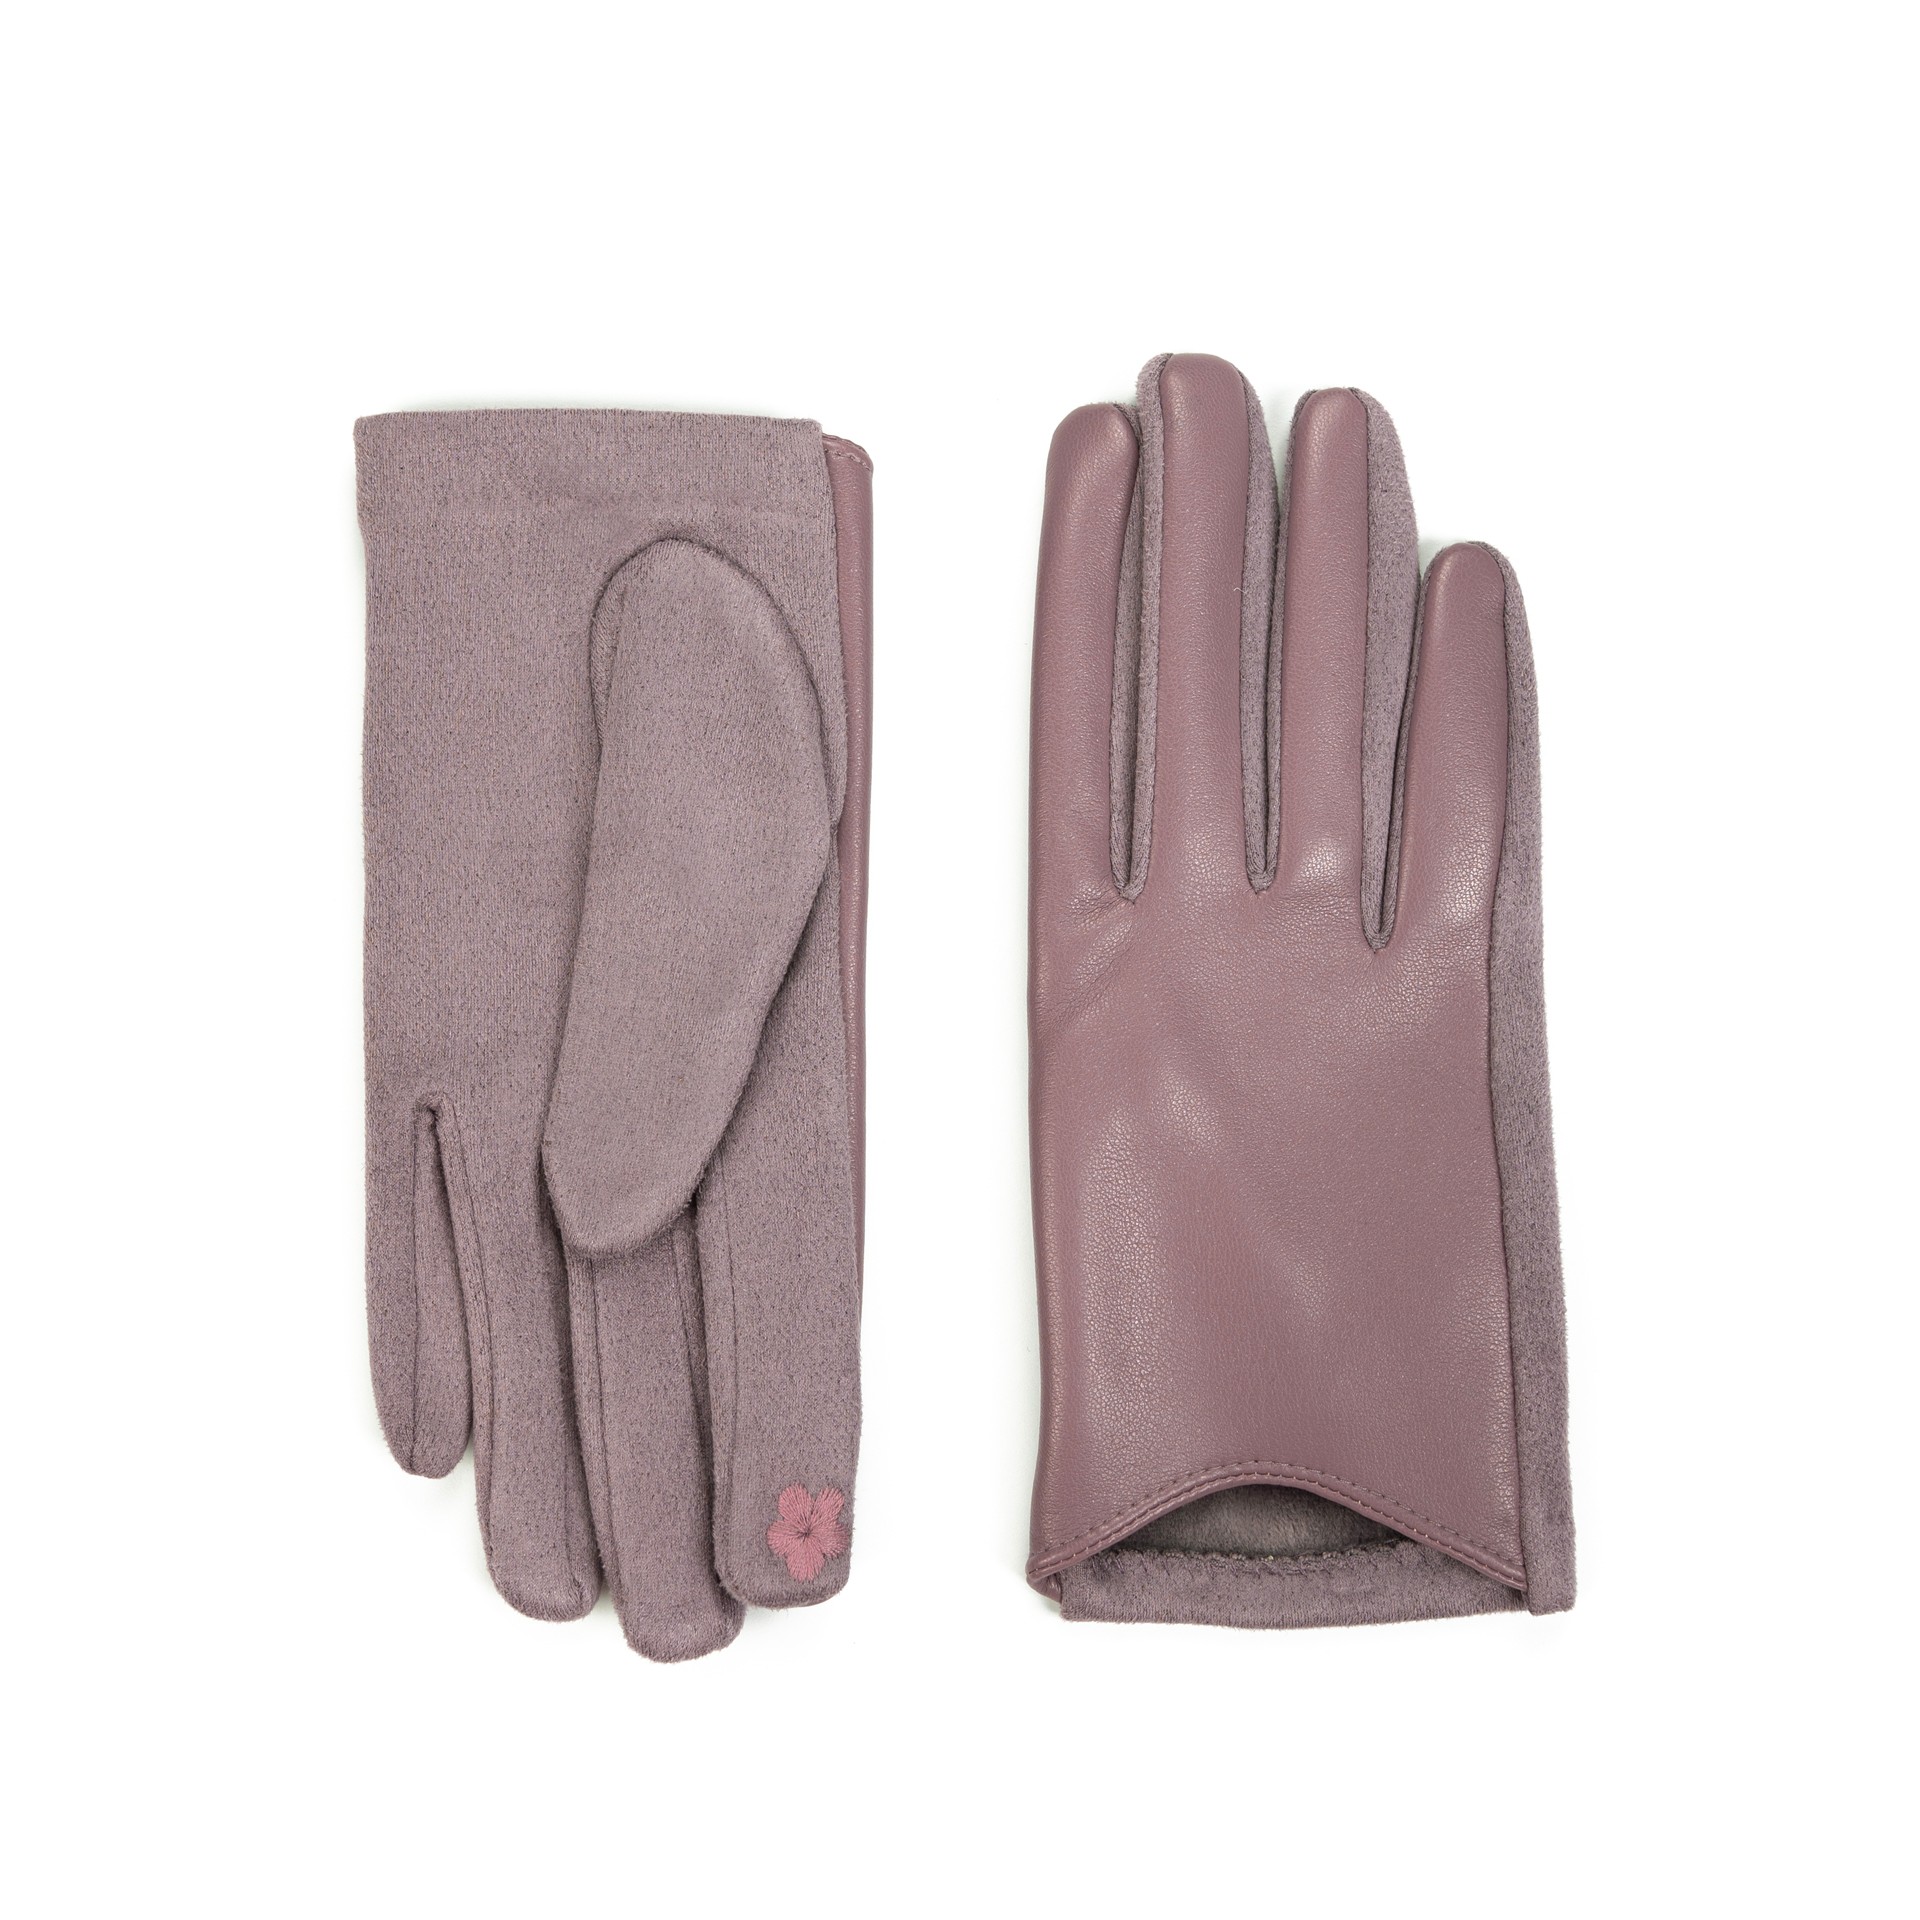 Art Of Polo Woman's Gloves Rk23392-2